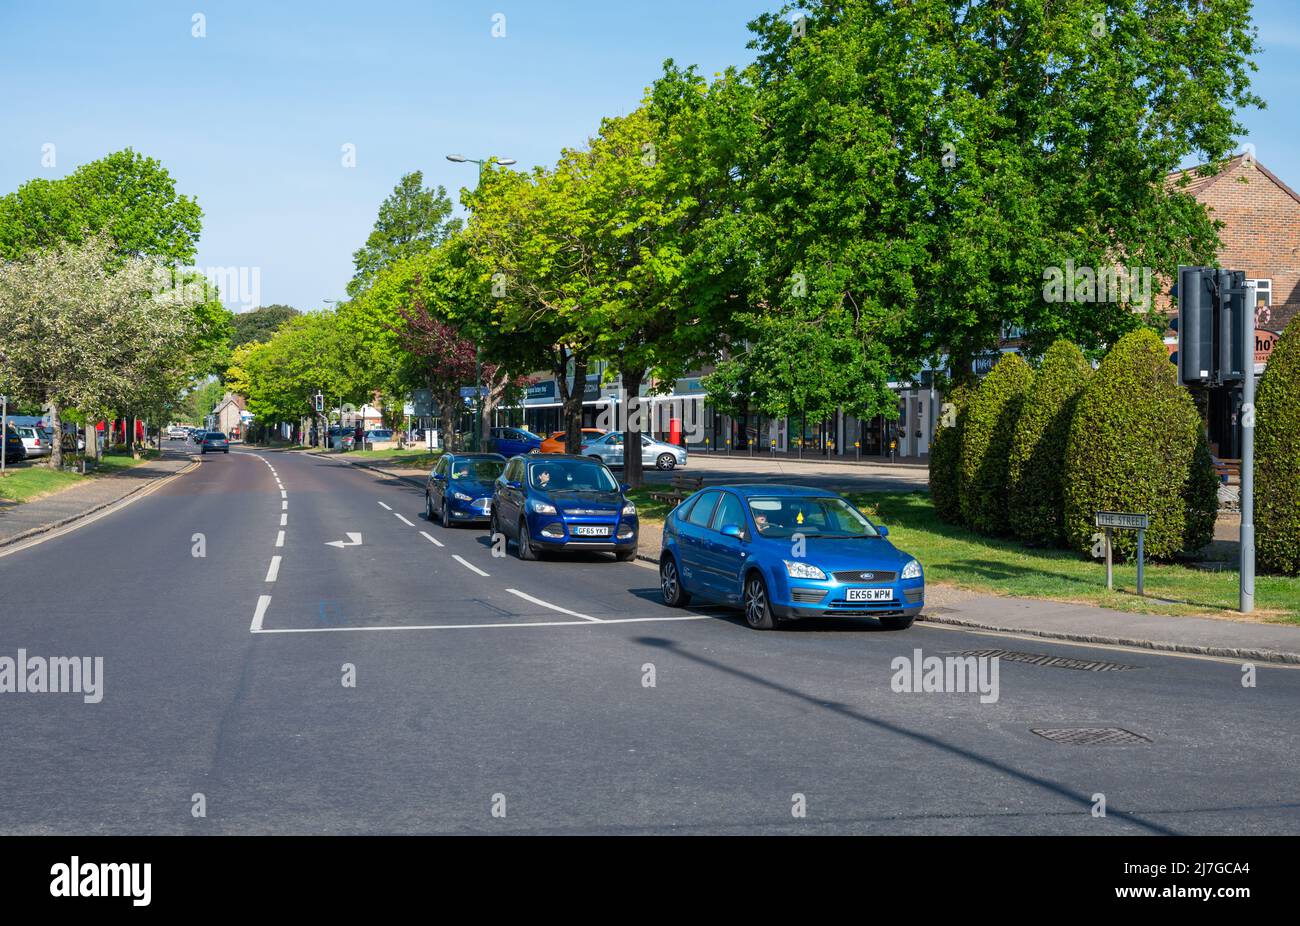 The main road and shops along The Street in the small British seaside town of Rustington Village, West Sussex, England, UK. Stock Photo